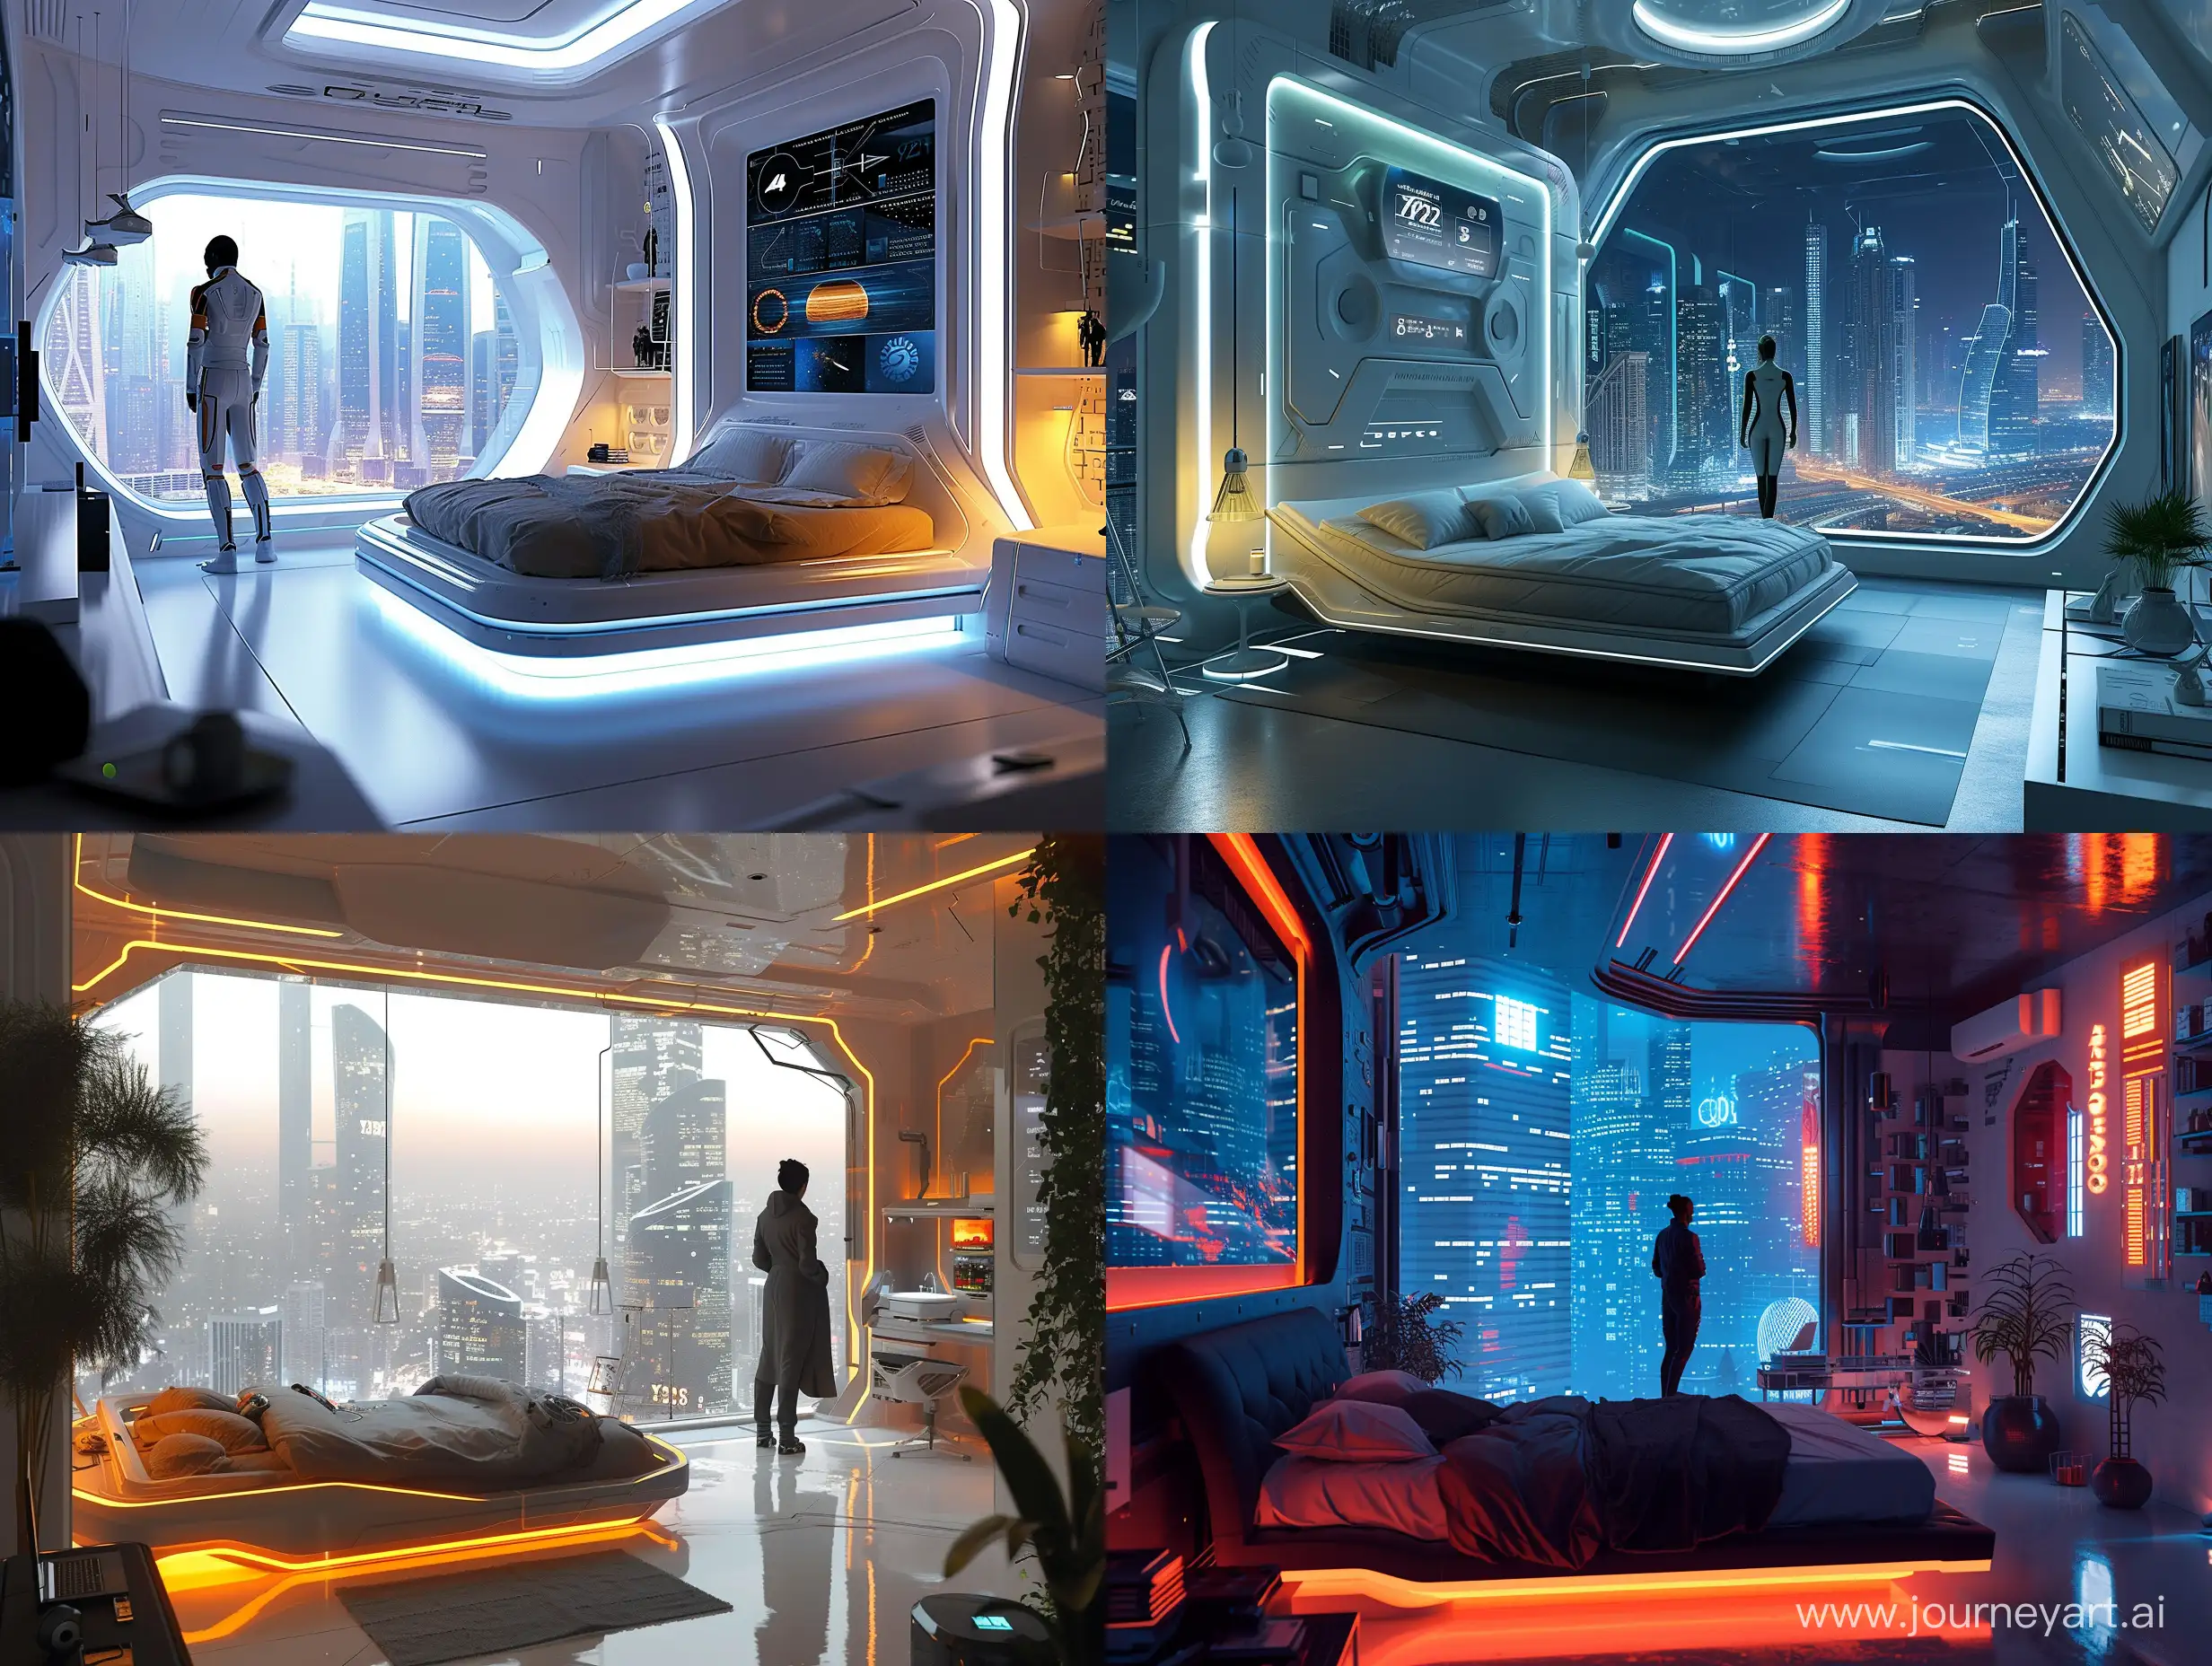 The bedroom features a modern design with a futuristic Y2K aesthetic and a variety of themes that showcase its unique architecture and atmosphere. It offers a peaceful setting with various lighting options, city, busy, a person standing up